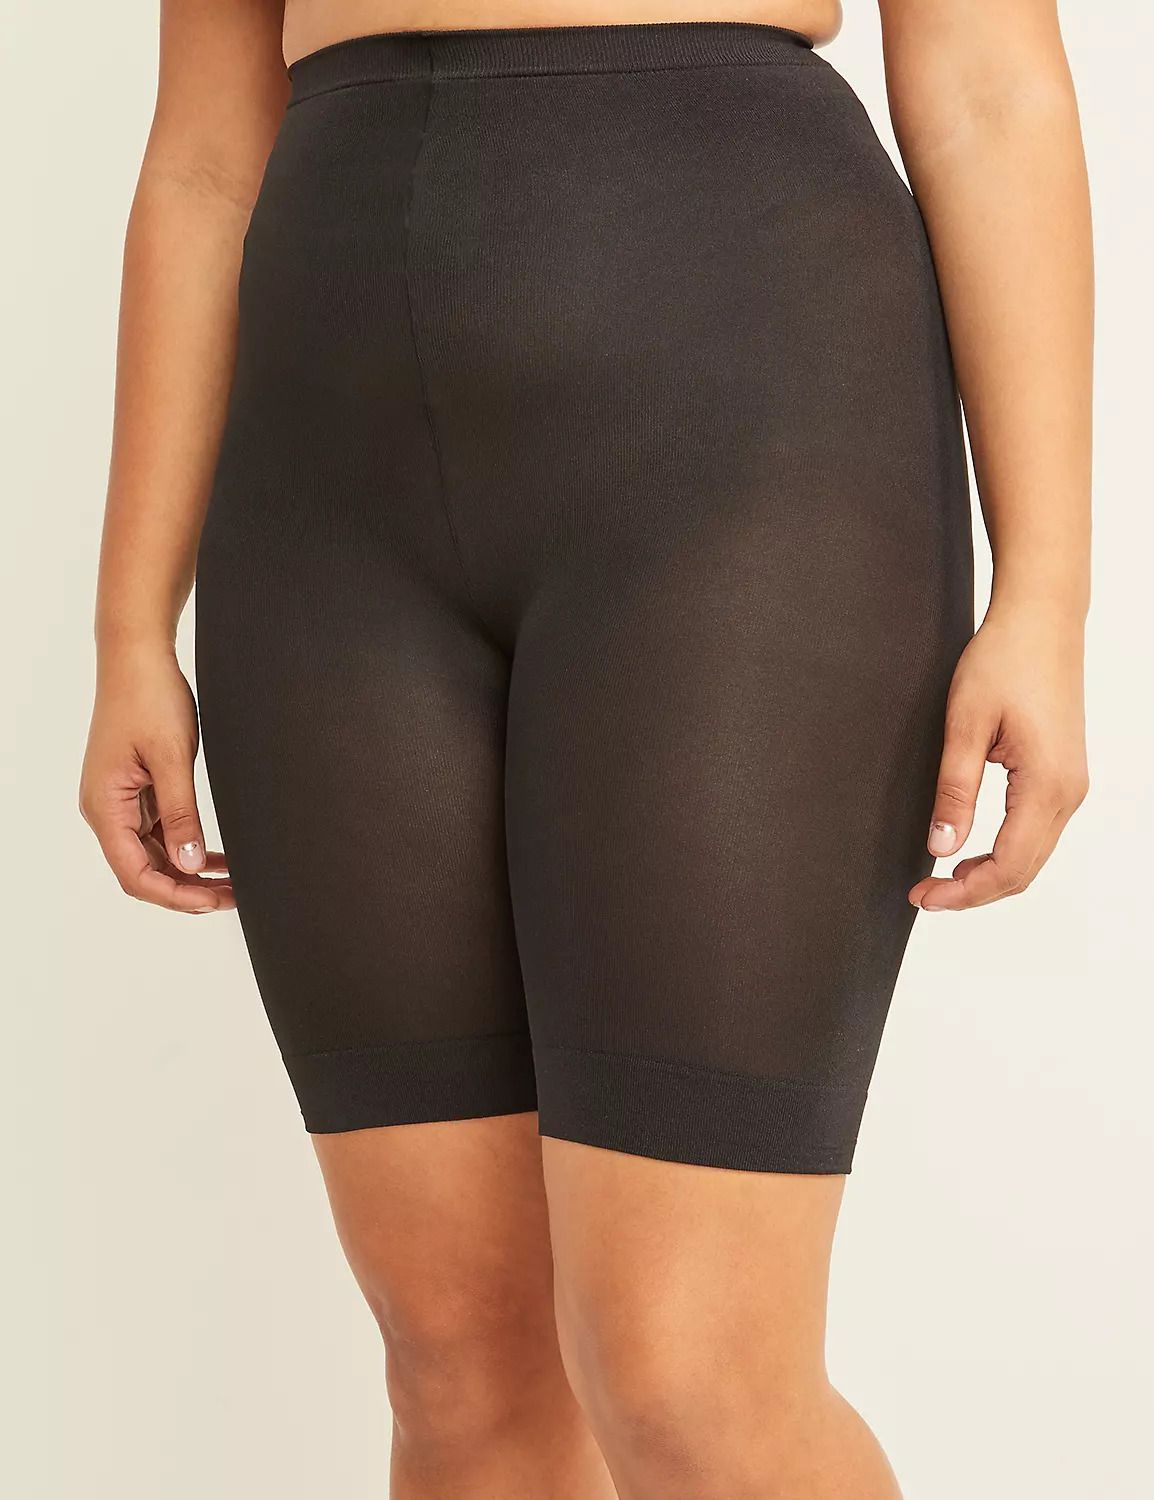 3 Tips - How To Avoid Chafing Between The Thighs - Zizzifashion